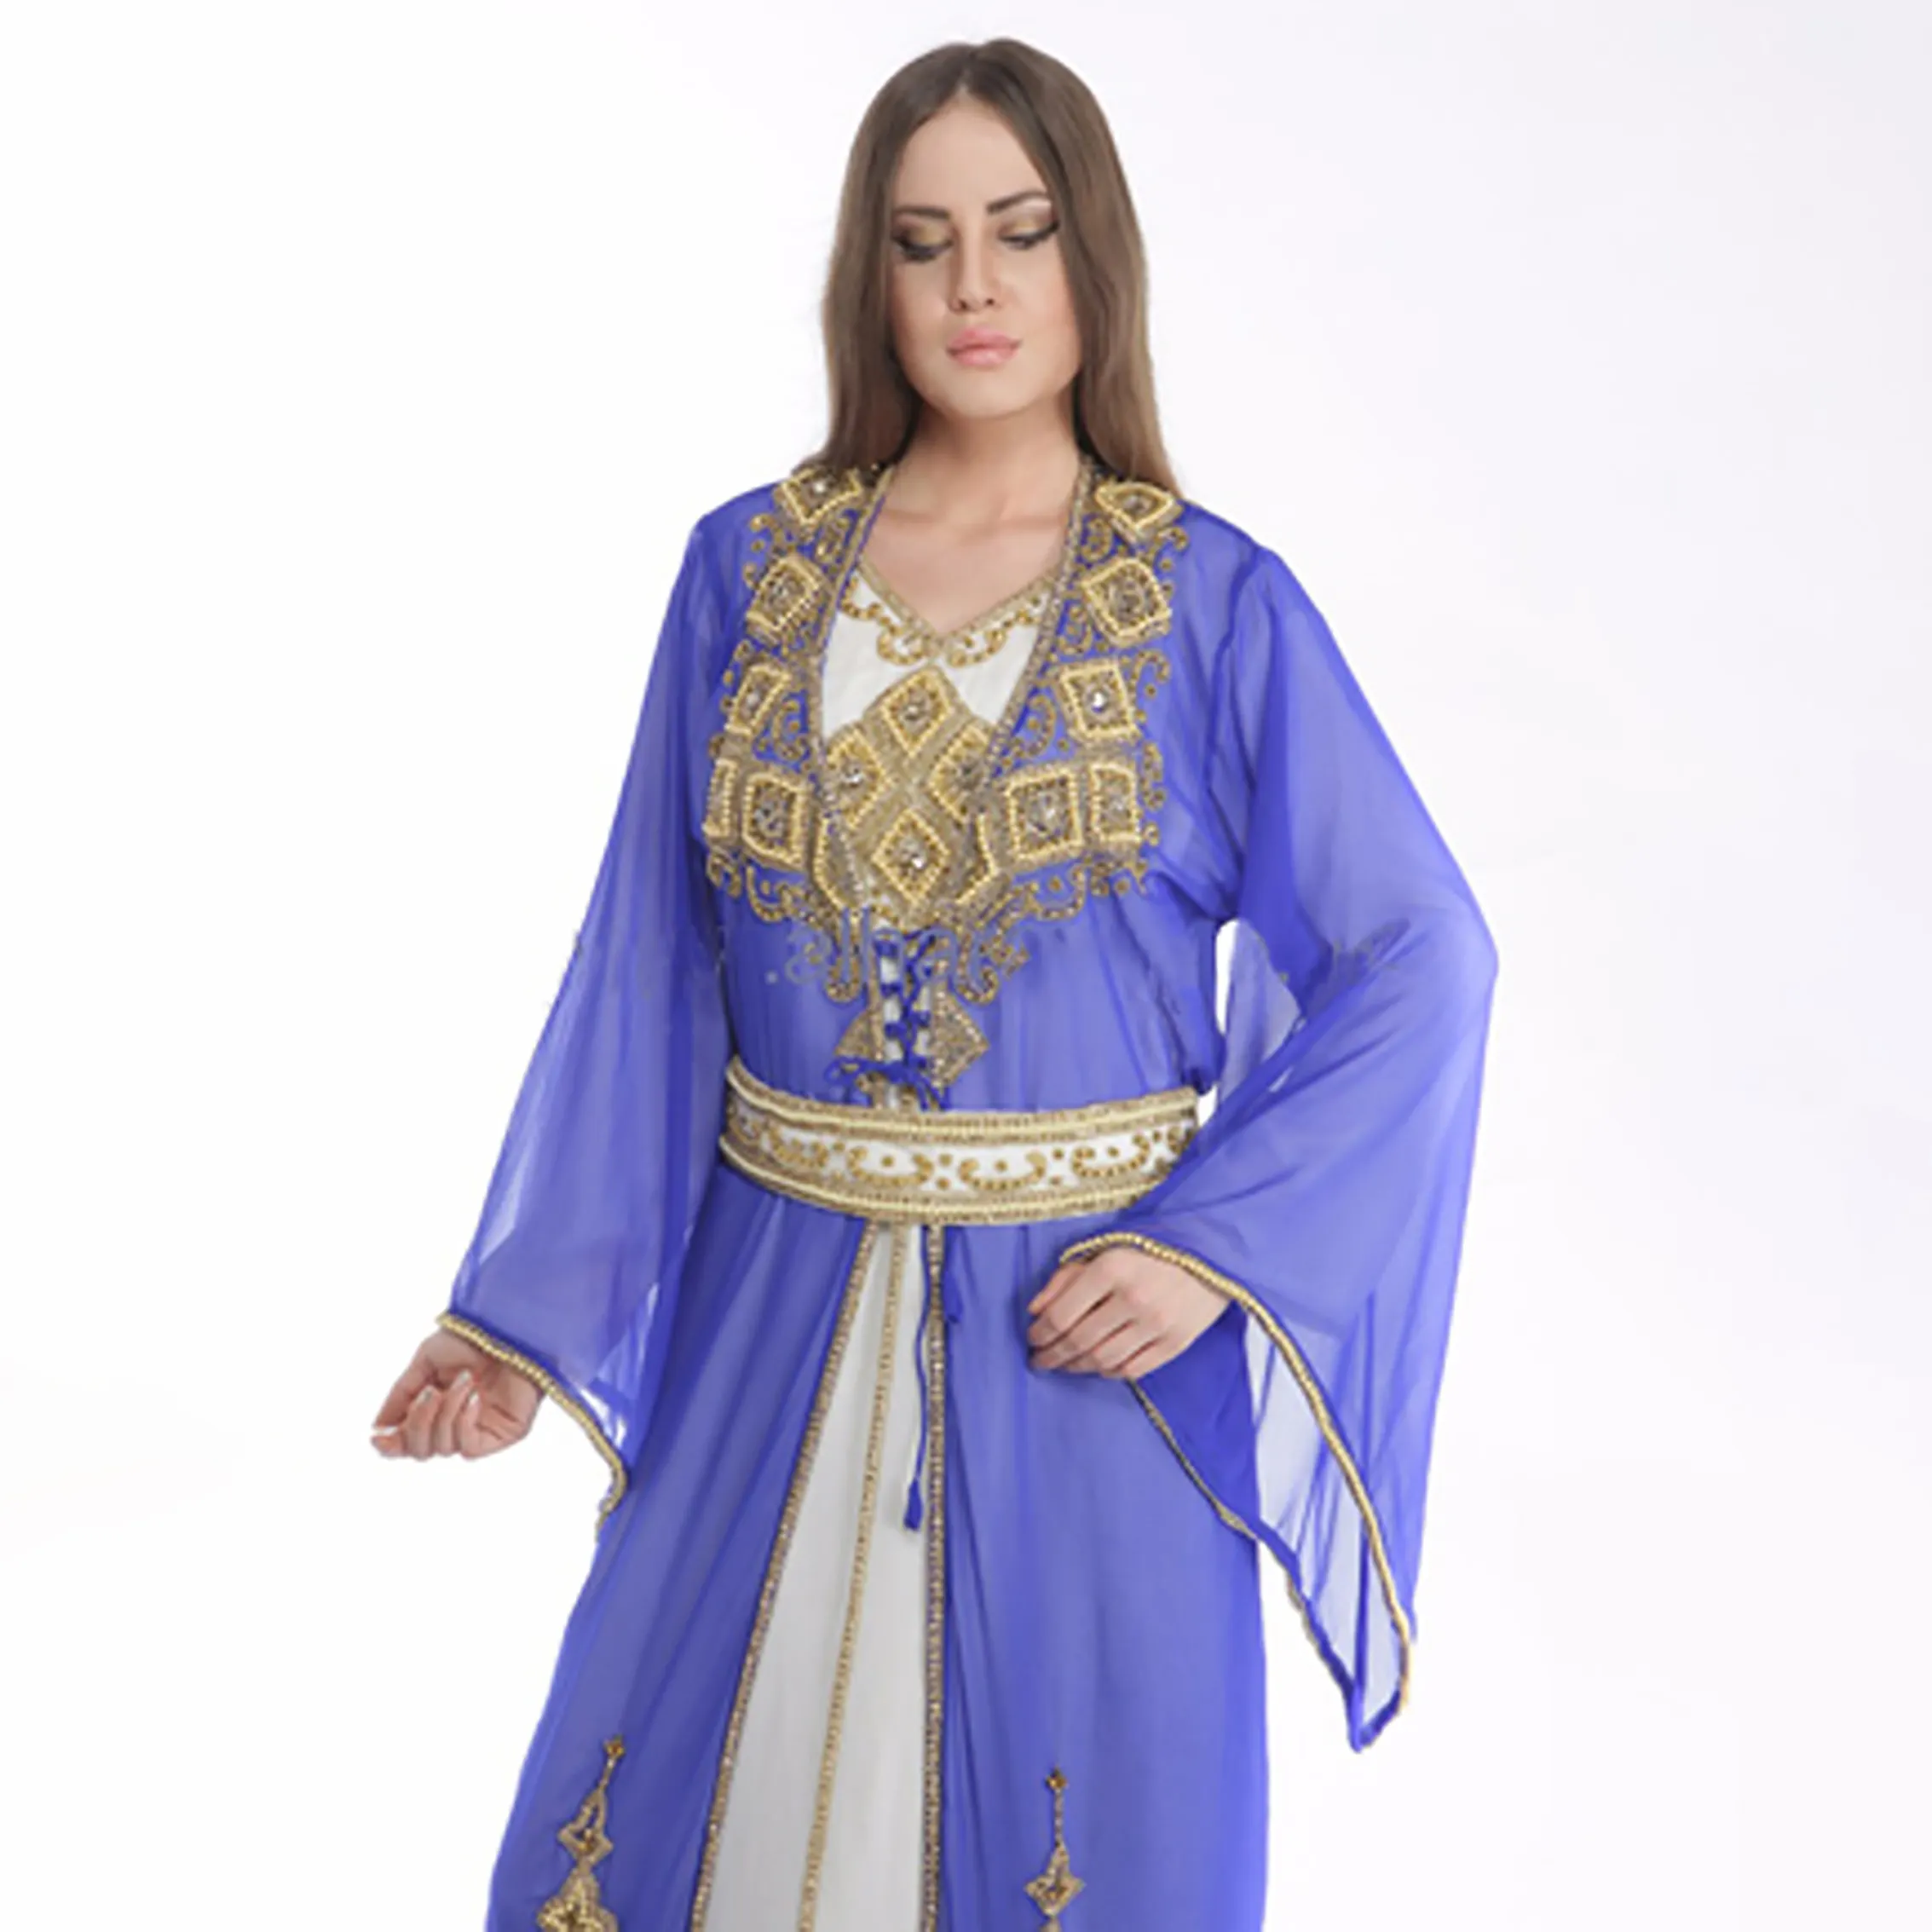 Modern and Beautiful occasion wear Long embroidered Farasha Kaftan Dress for Export Supply - Model NO 40165